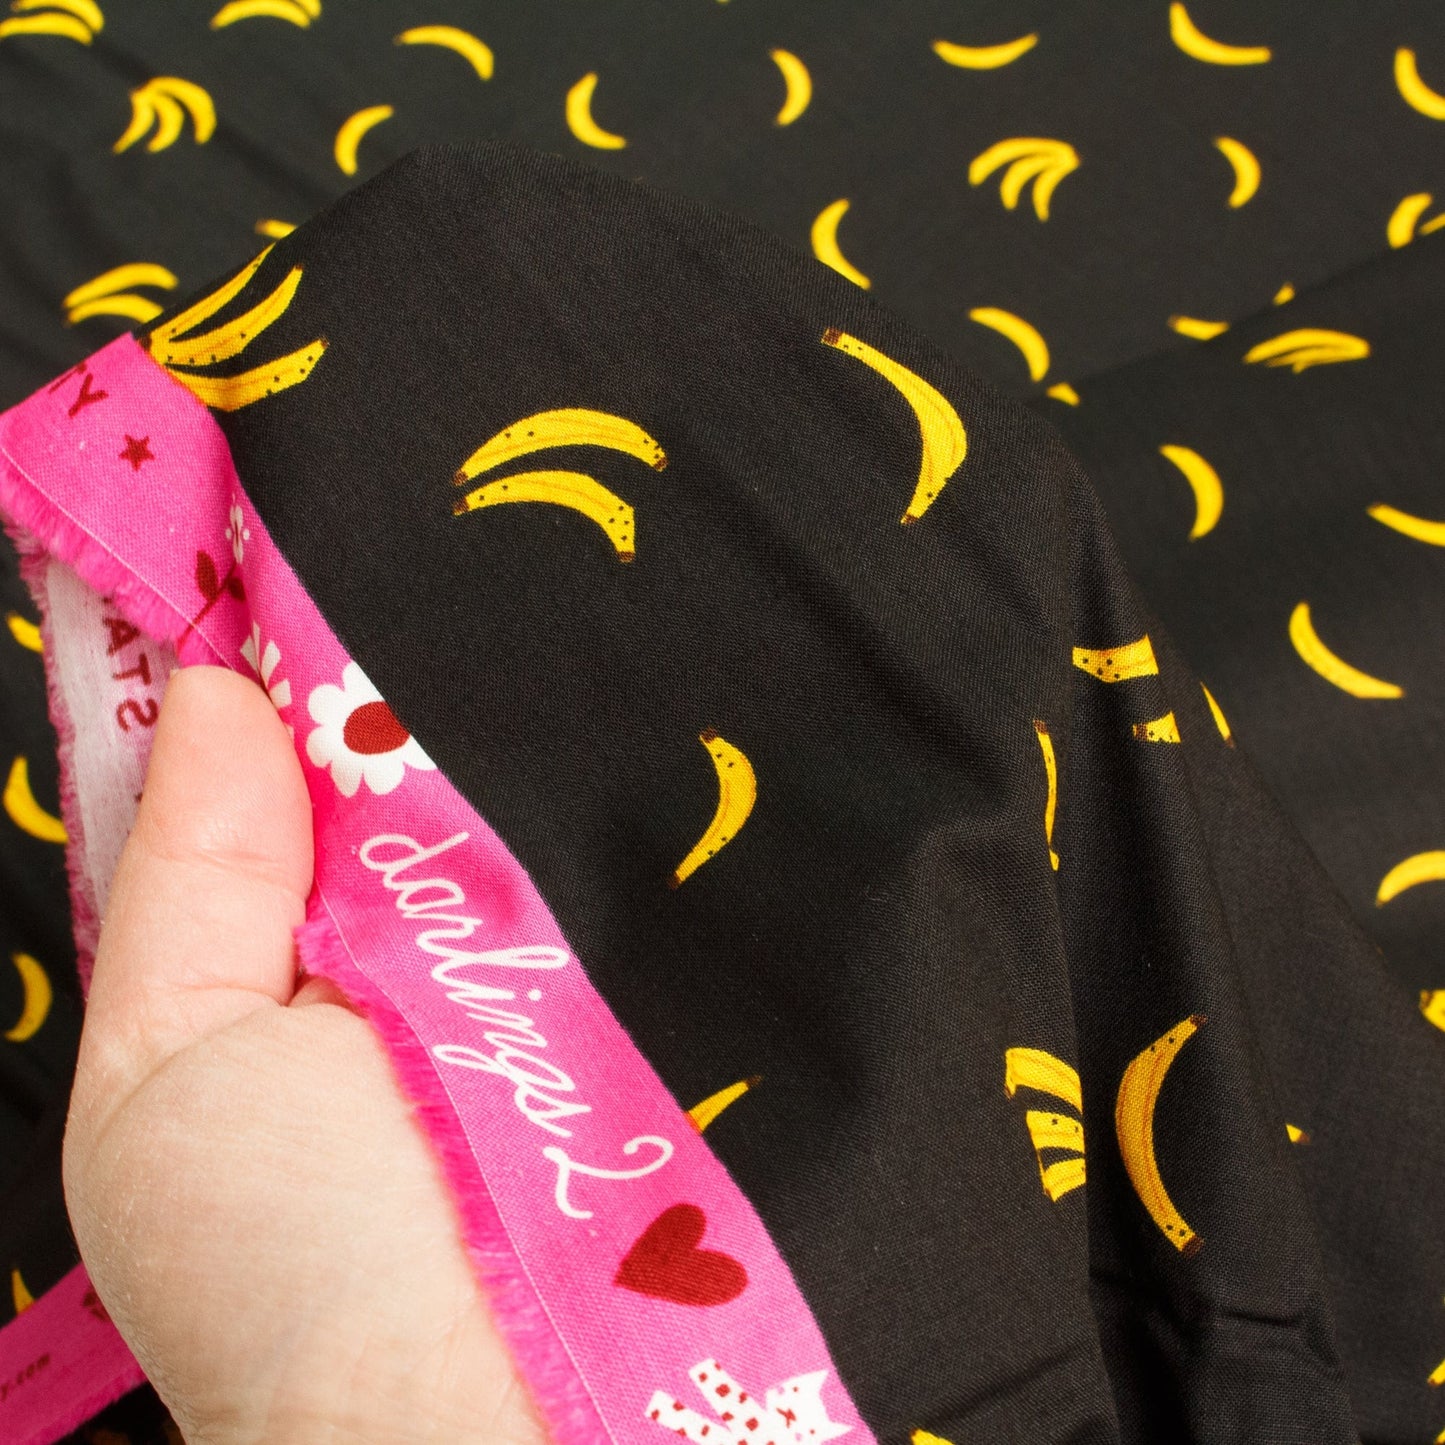 Ruby Star Society Quilting Cotton 'Darlings 2': 'Nanners' in Black